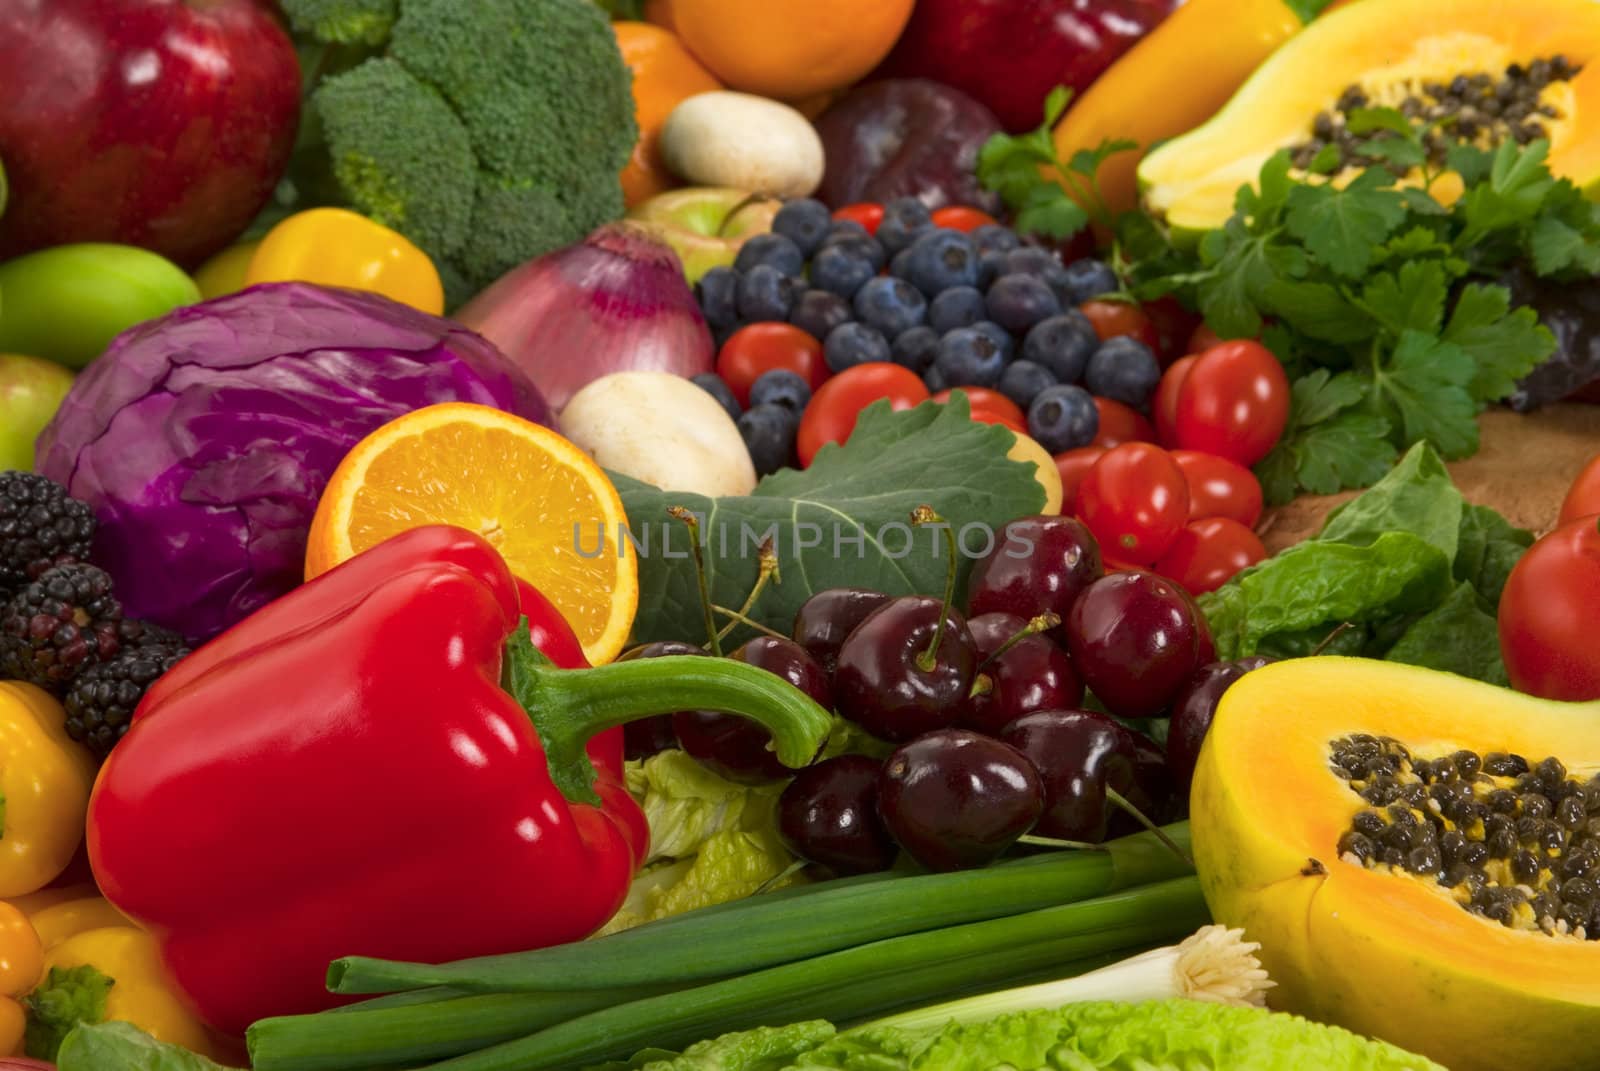 Vegetables and Fruits by BVDC